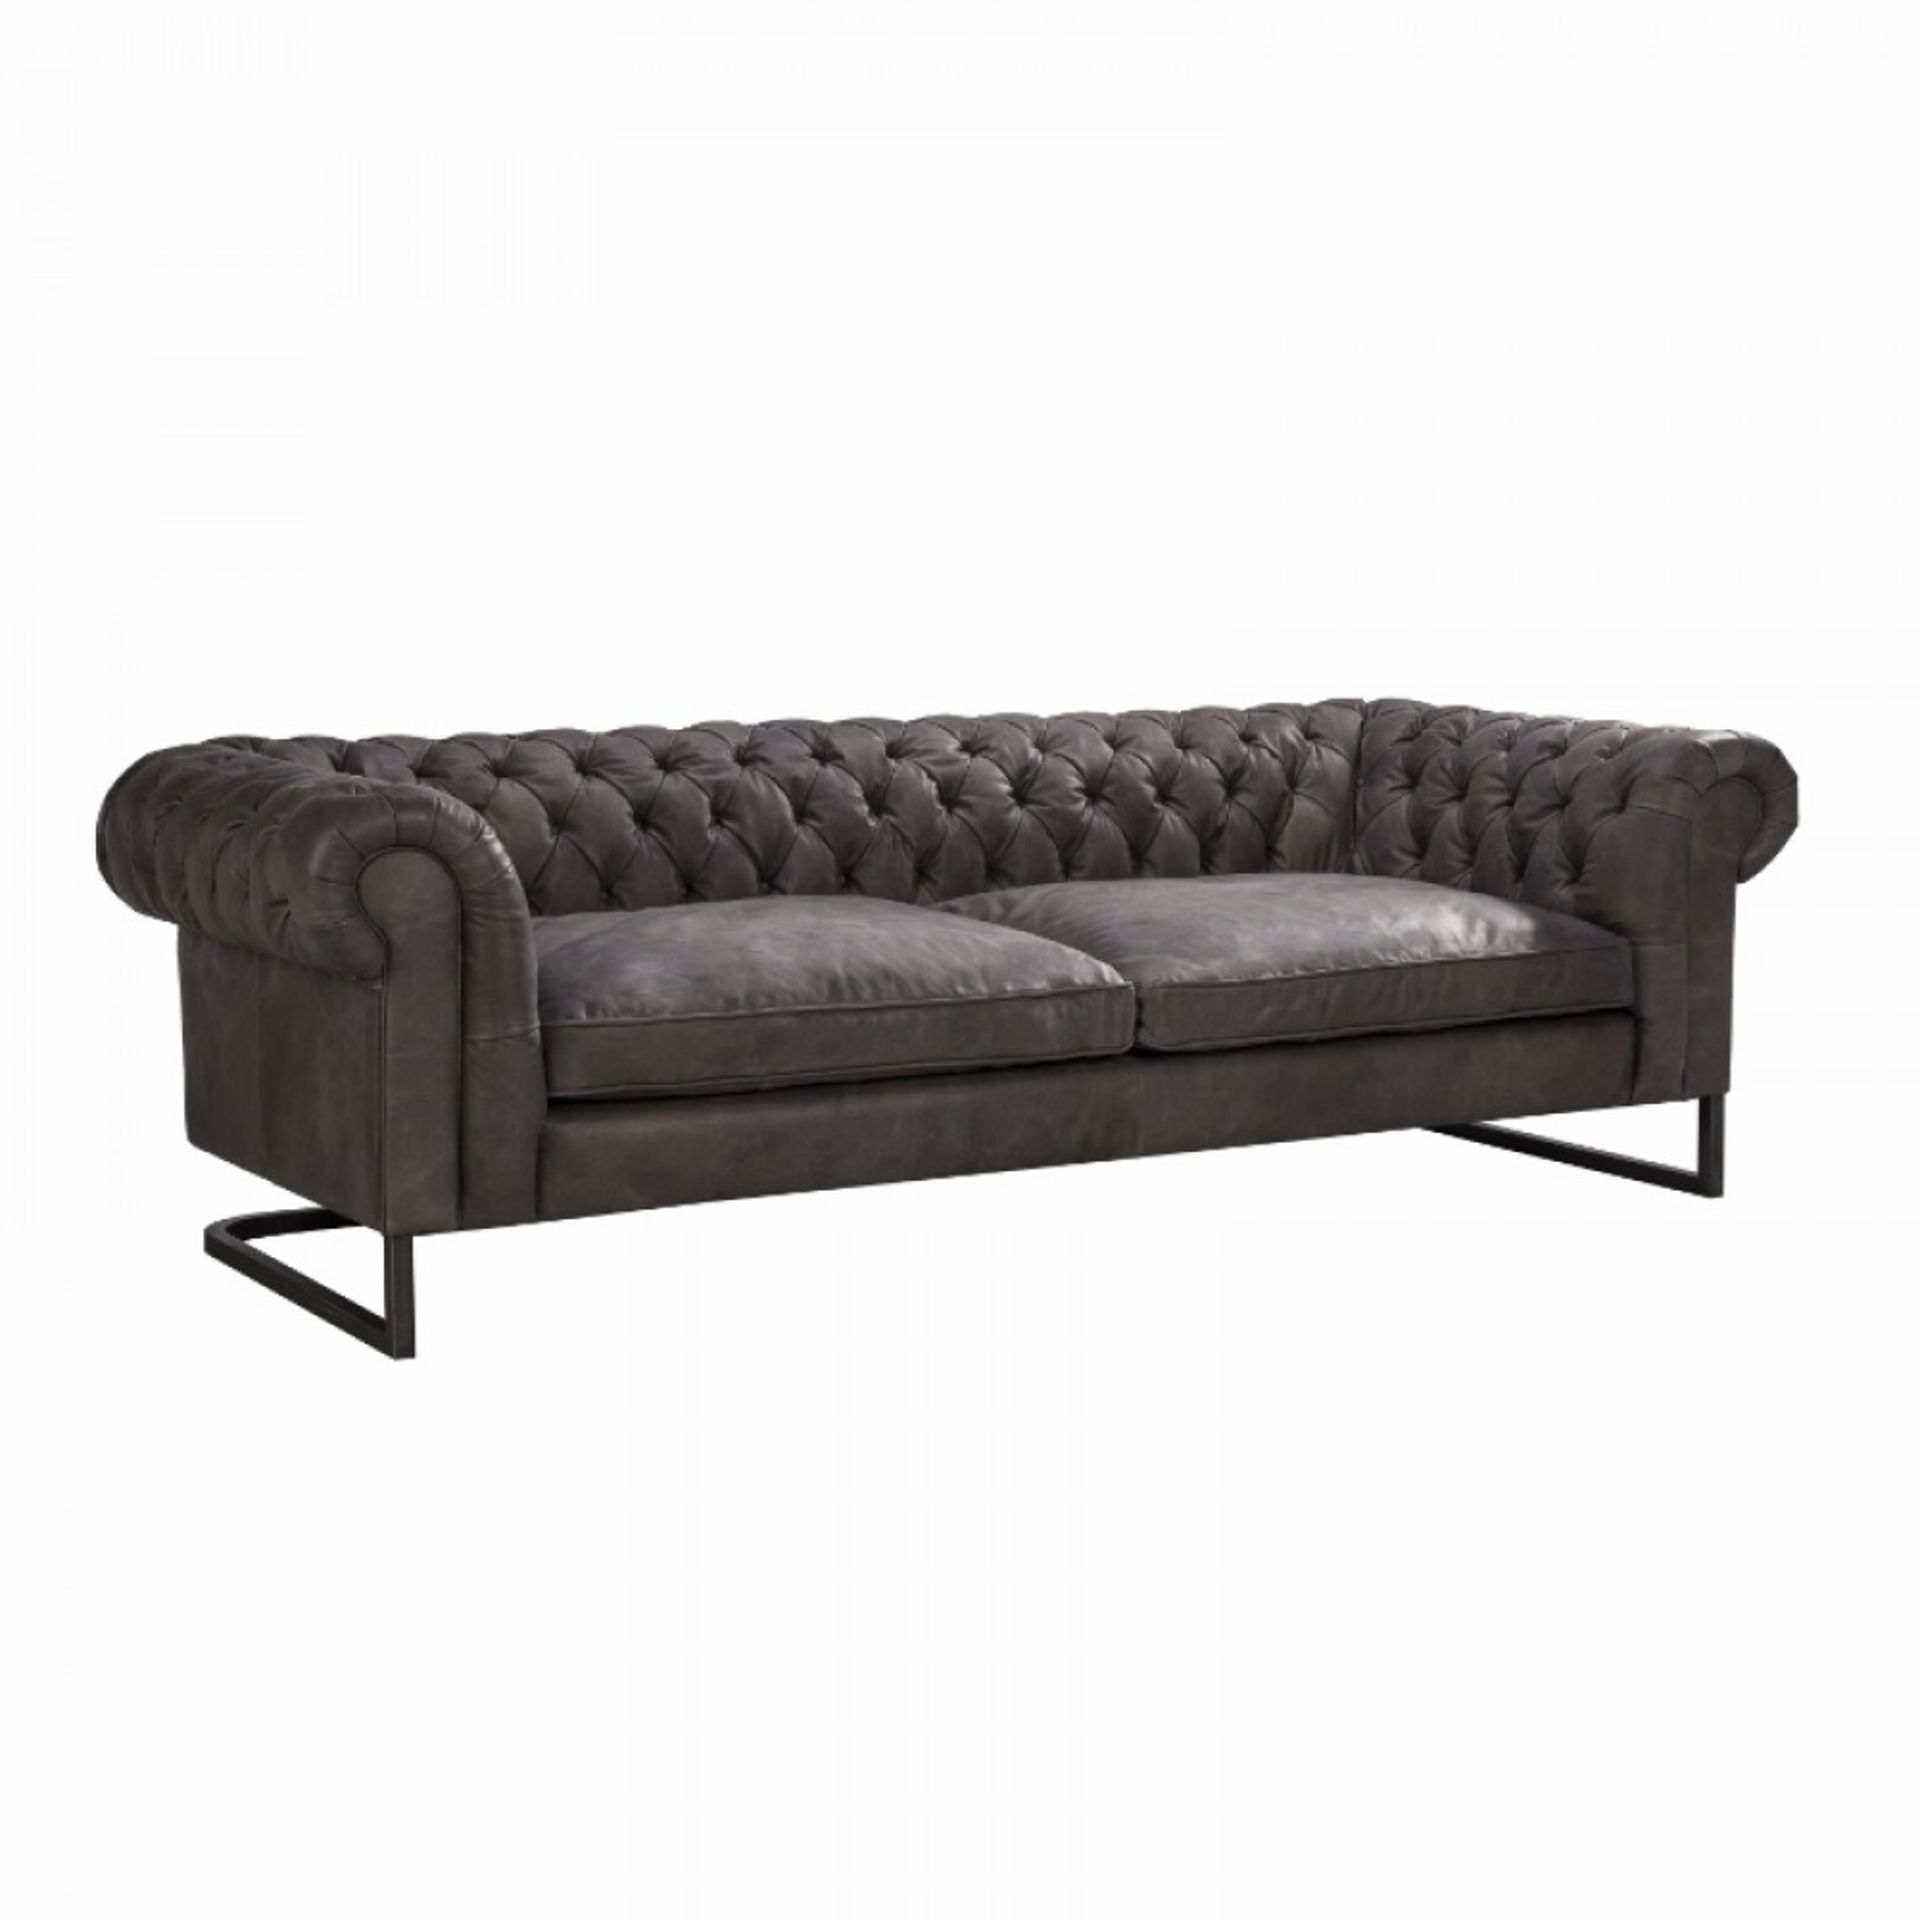 Piloti Sofa 3 Seater Black Leather and Iron Frame A modern take on the classic Chesterfield style